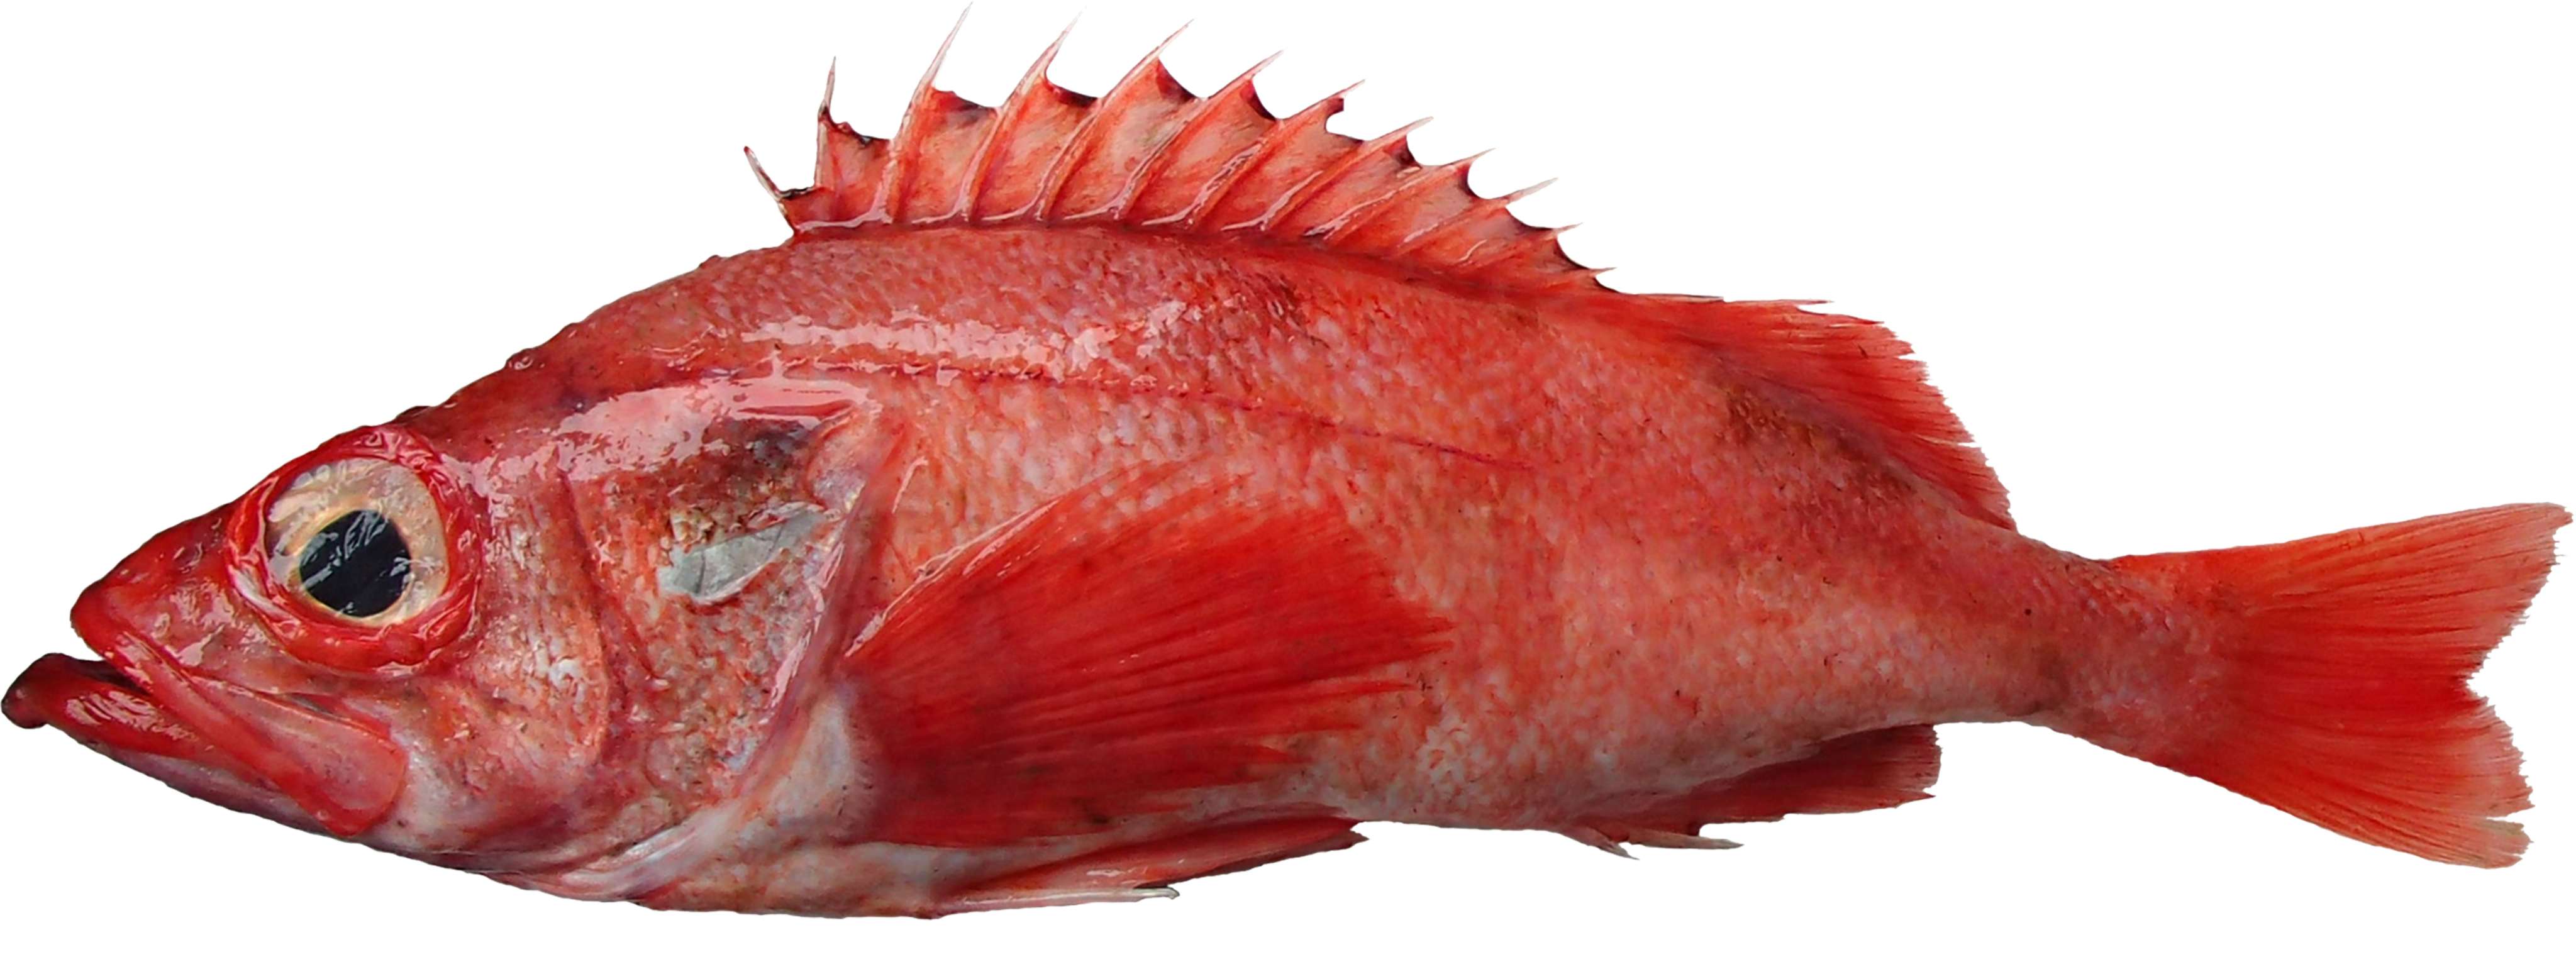 19-facts-about-ocean-perch